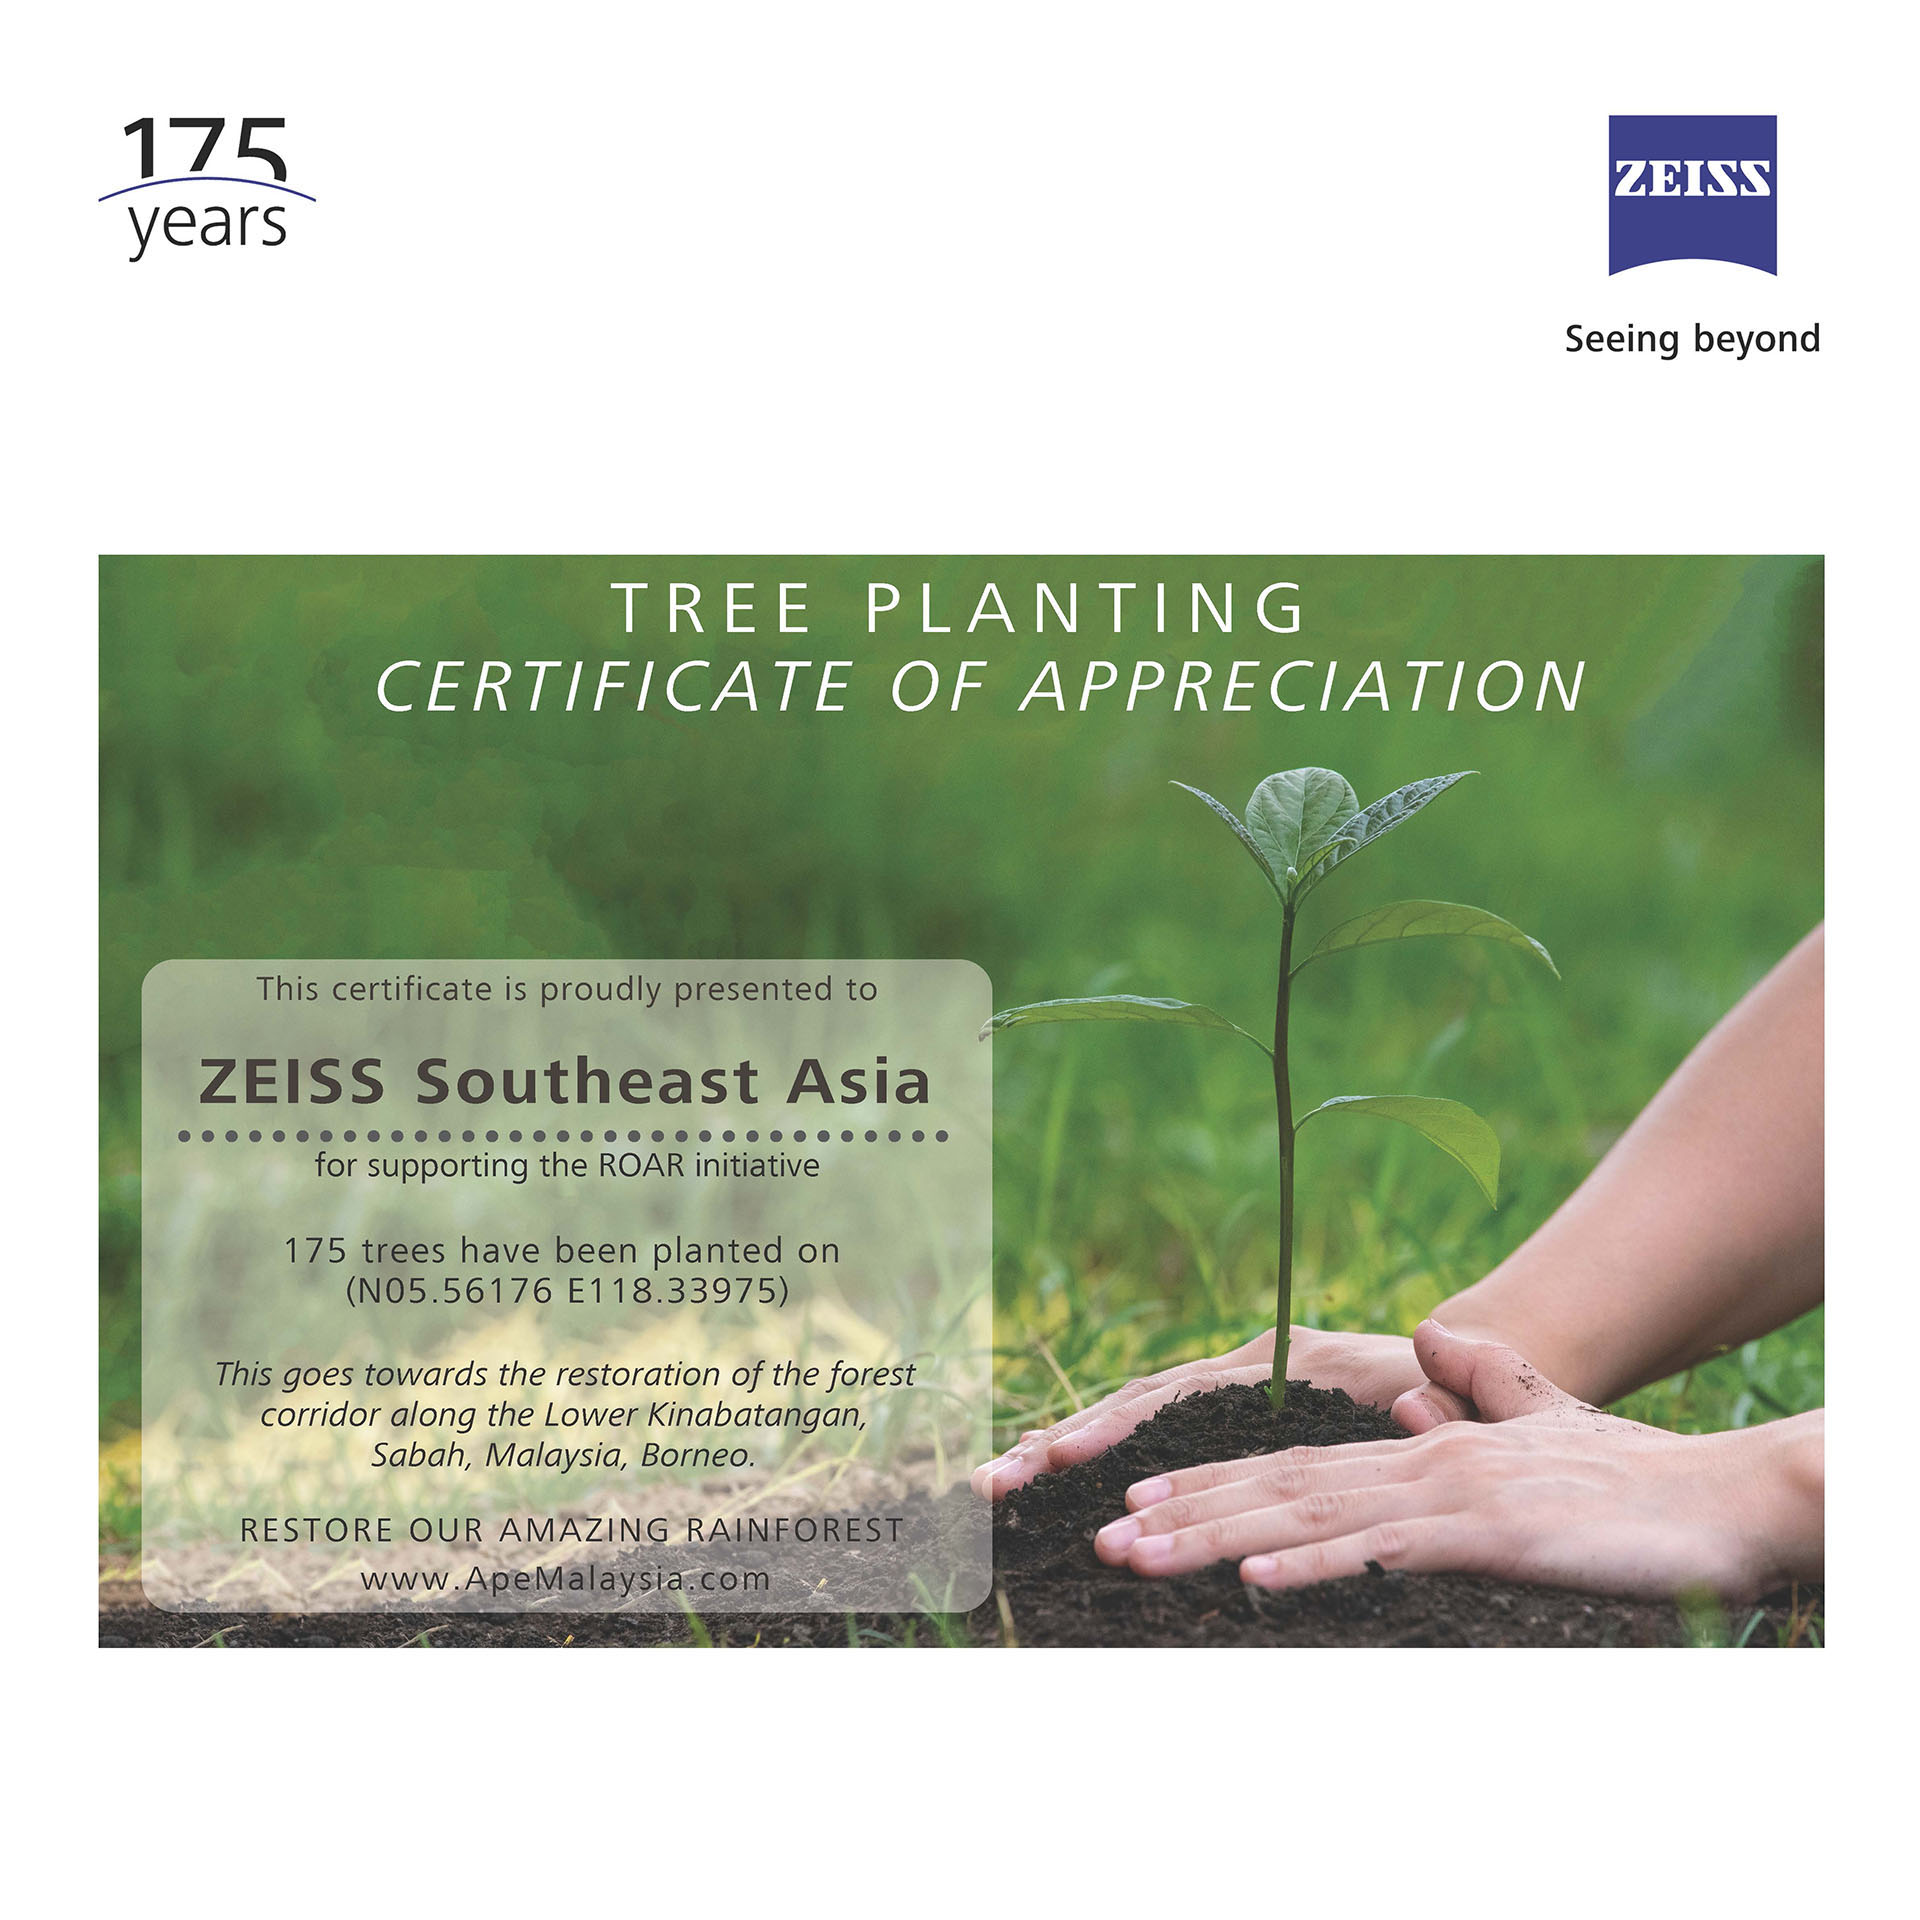 Tree planting certificate of appreciation for ZEISS SEA